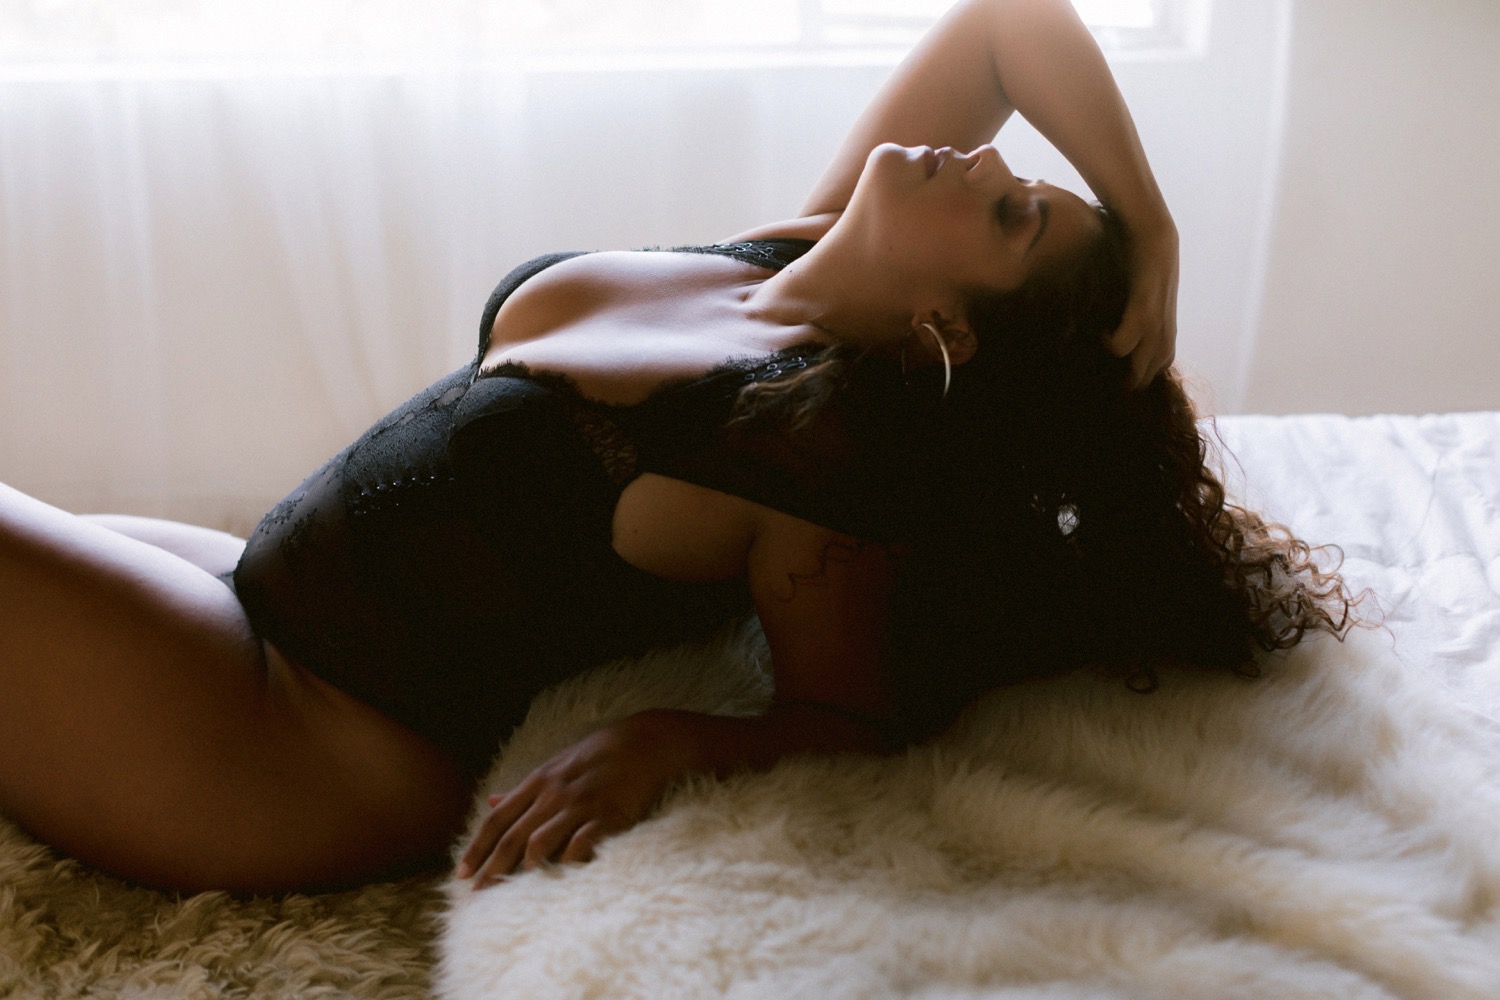 East Bay Boudoir Photographer Empowering each other